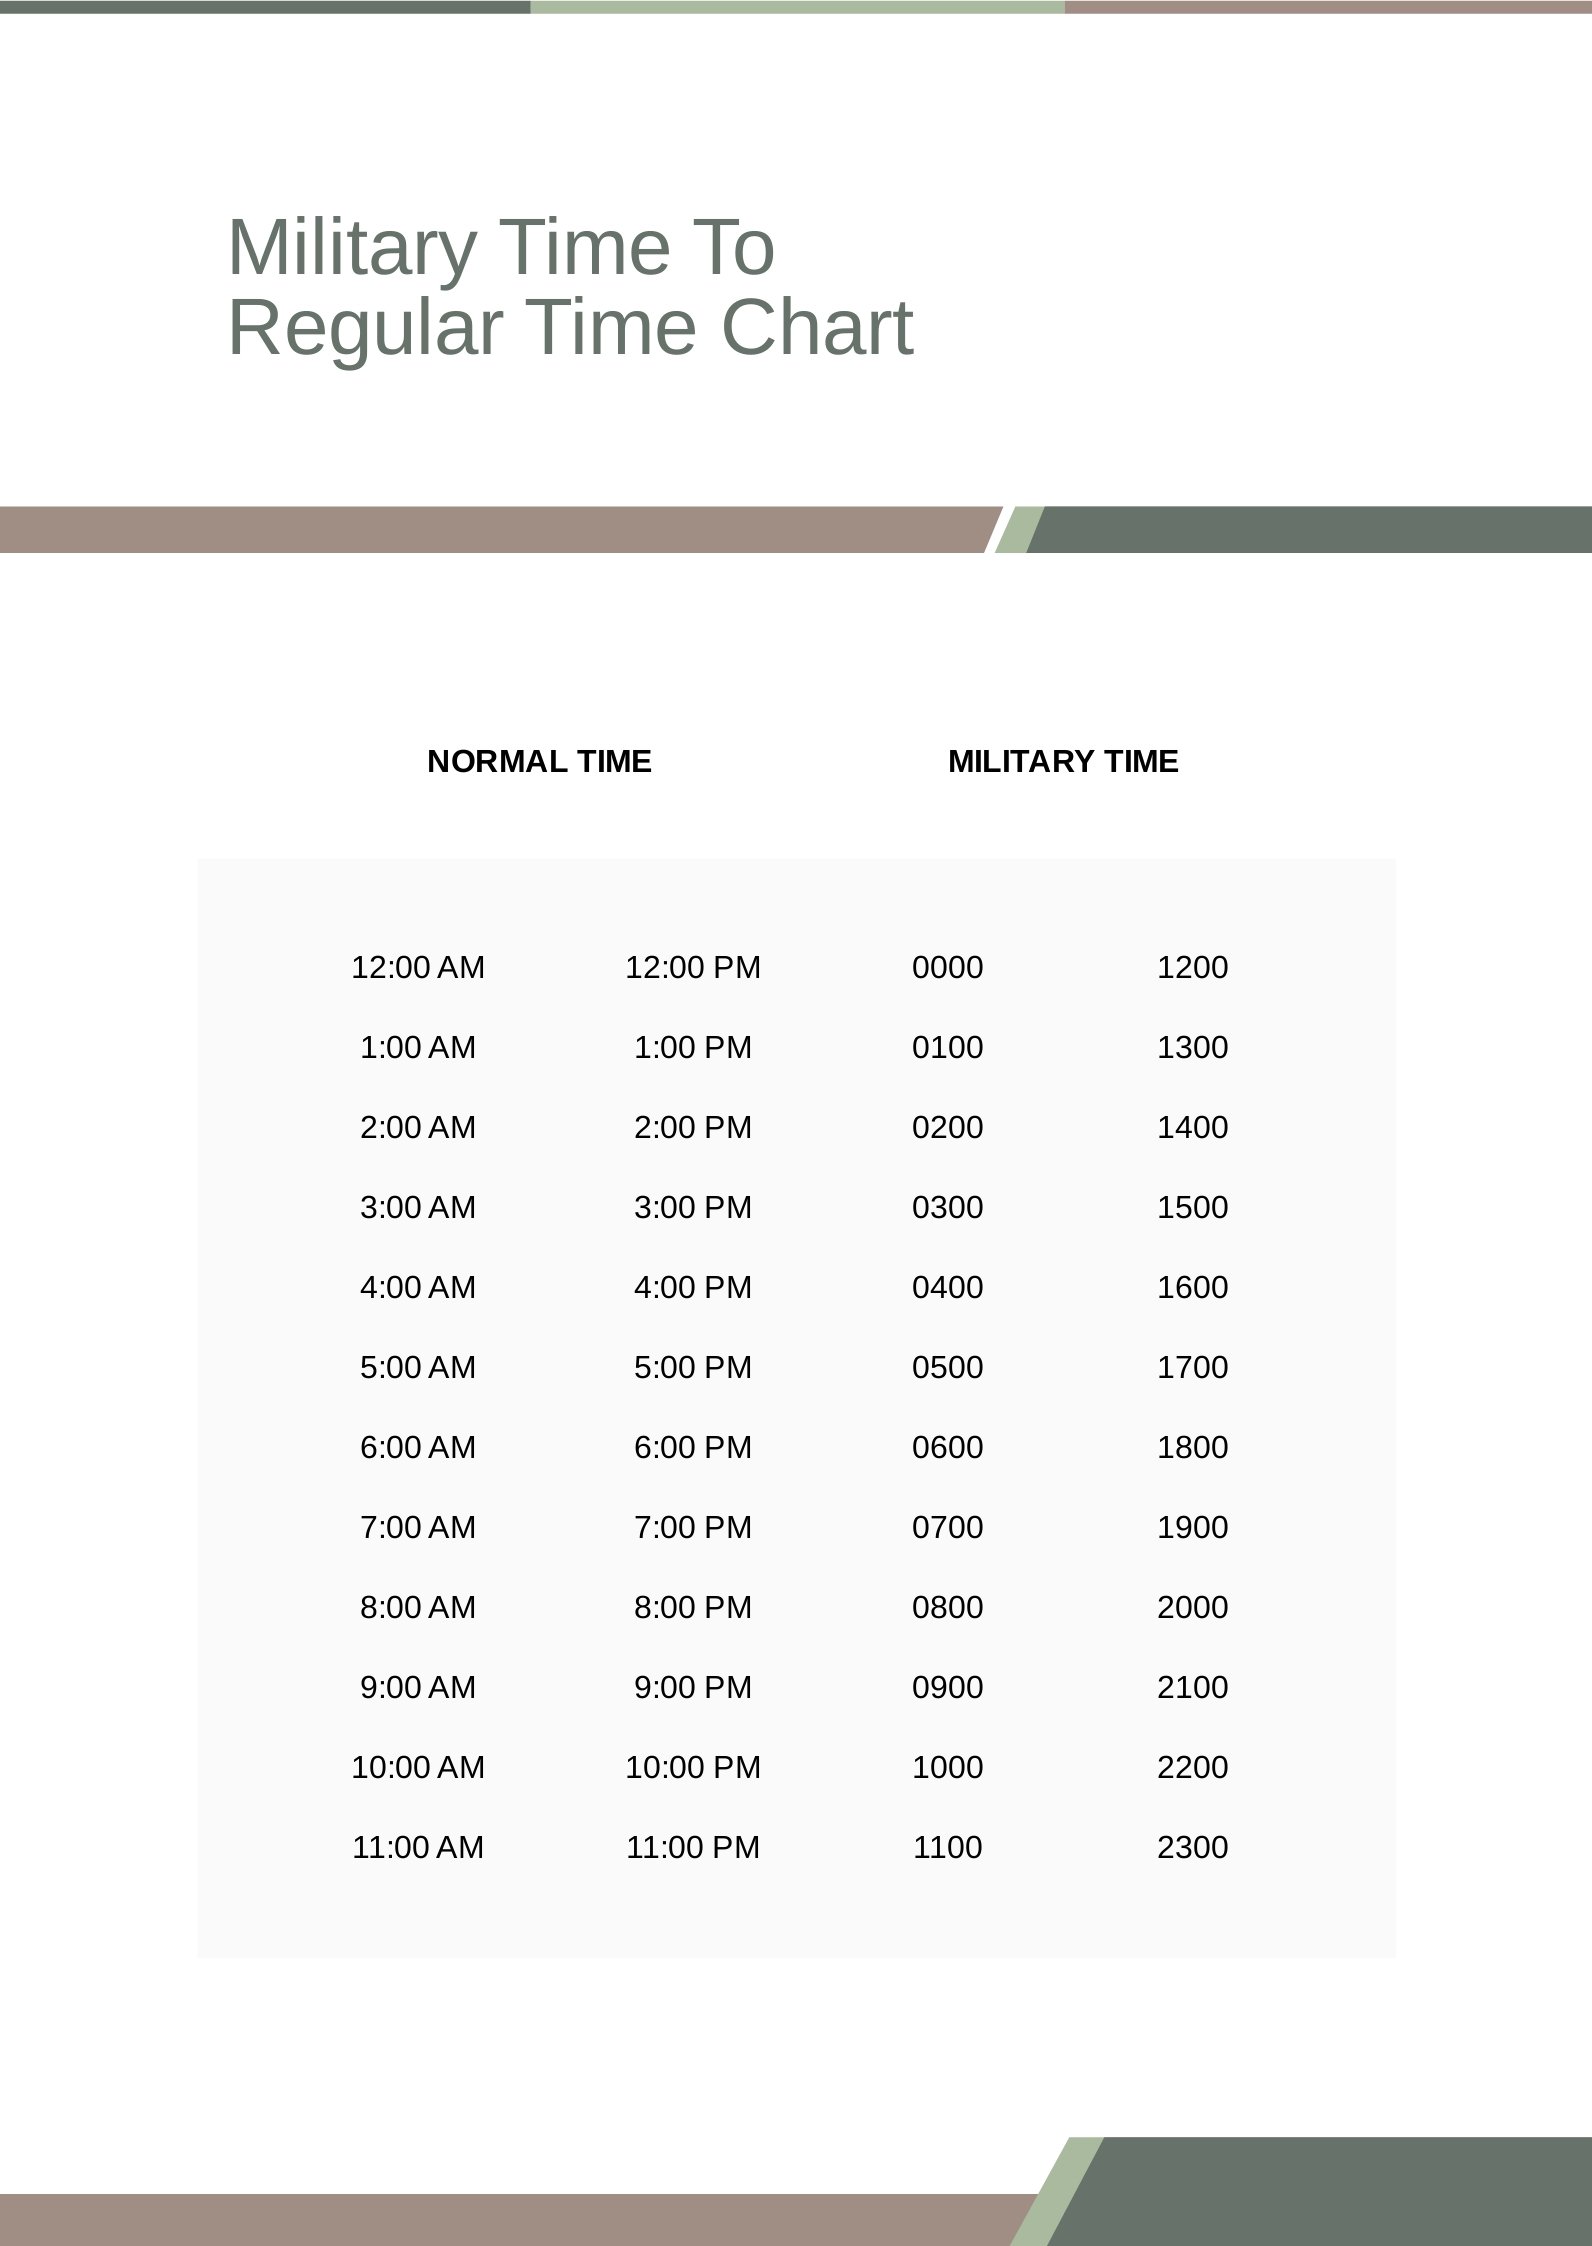 Military Time To Regular Time Chart Template